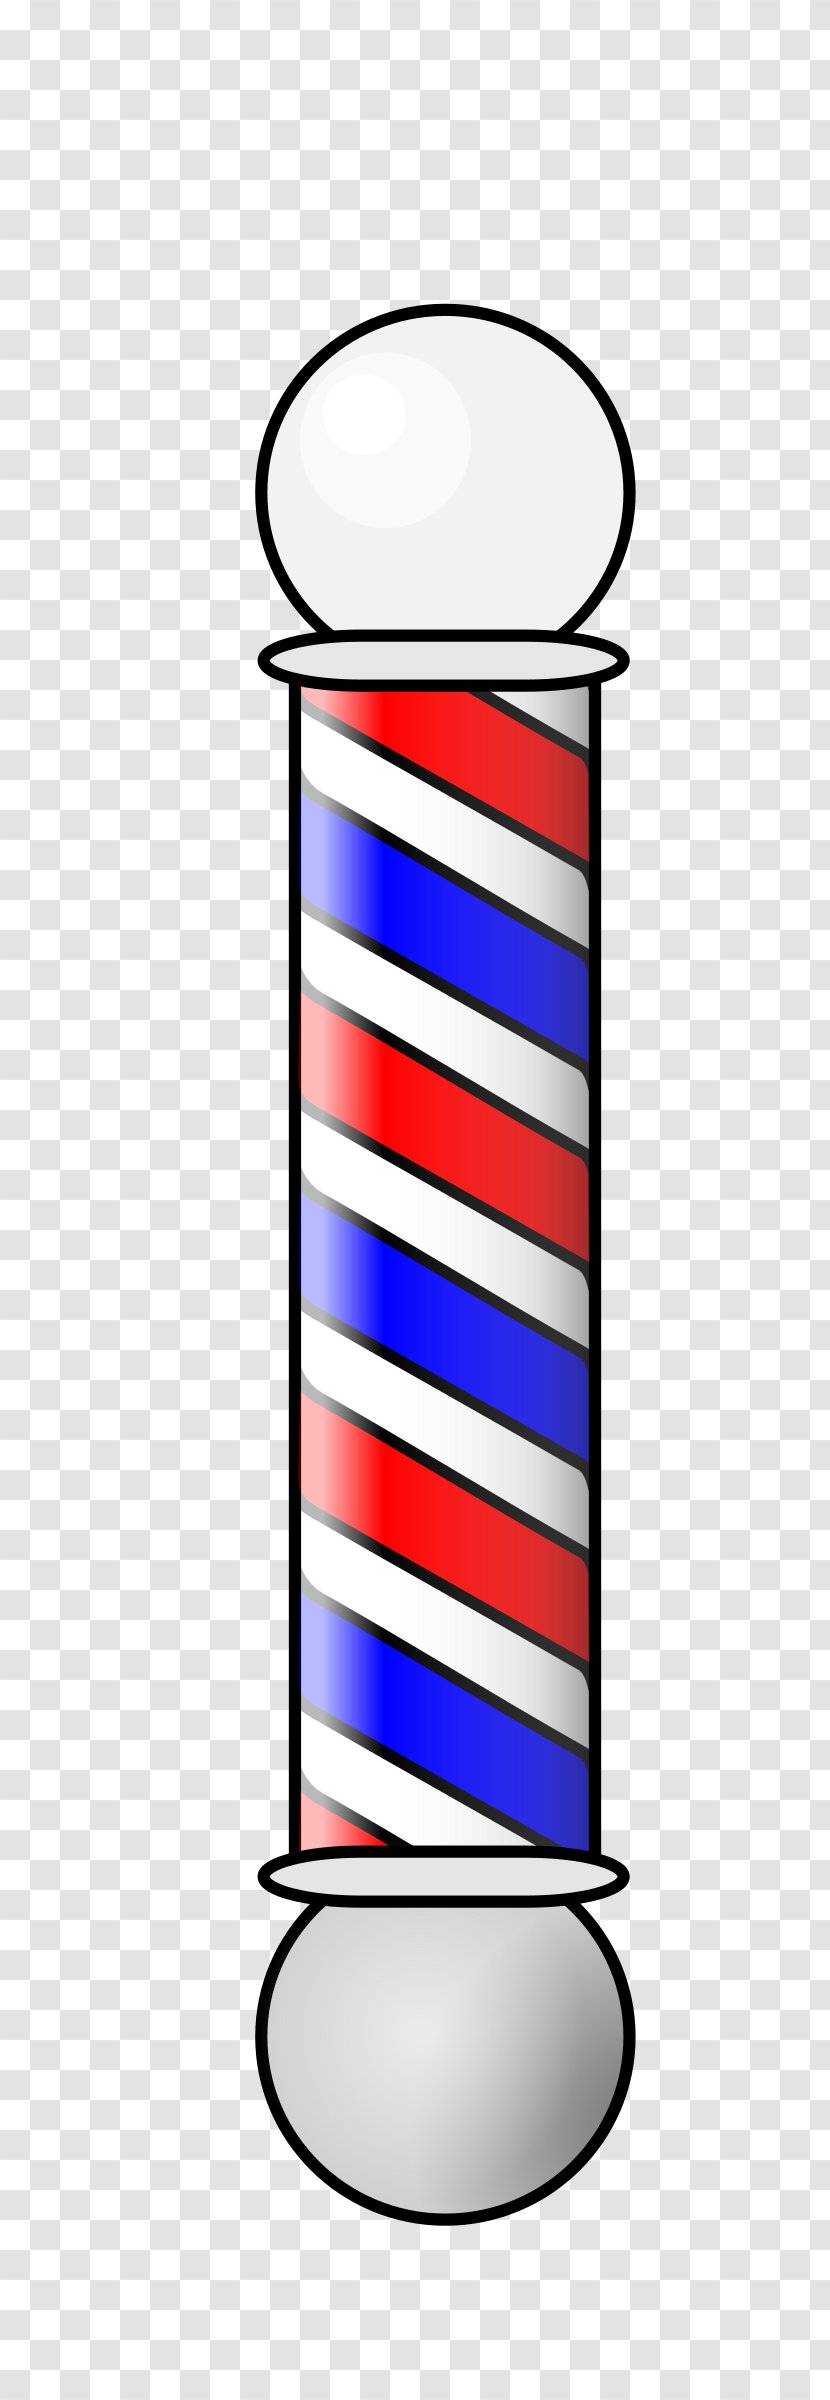 Barber's Pole Hair Clipper Hairstyle Clip Art - Coloring - Animation Transparent PNG